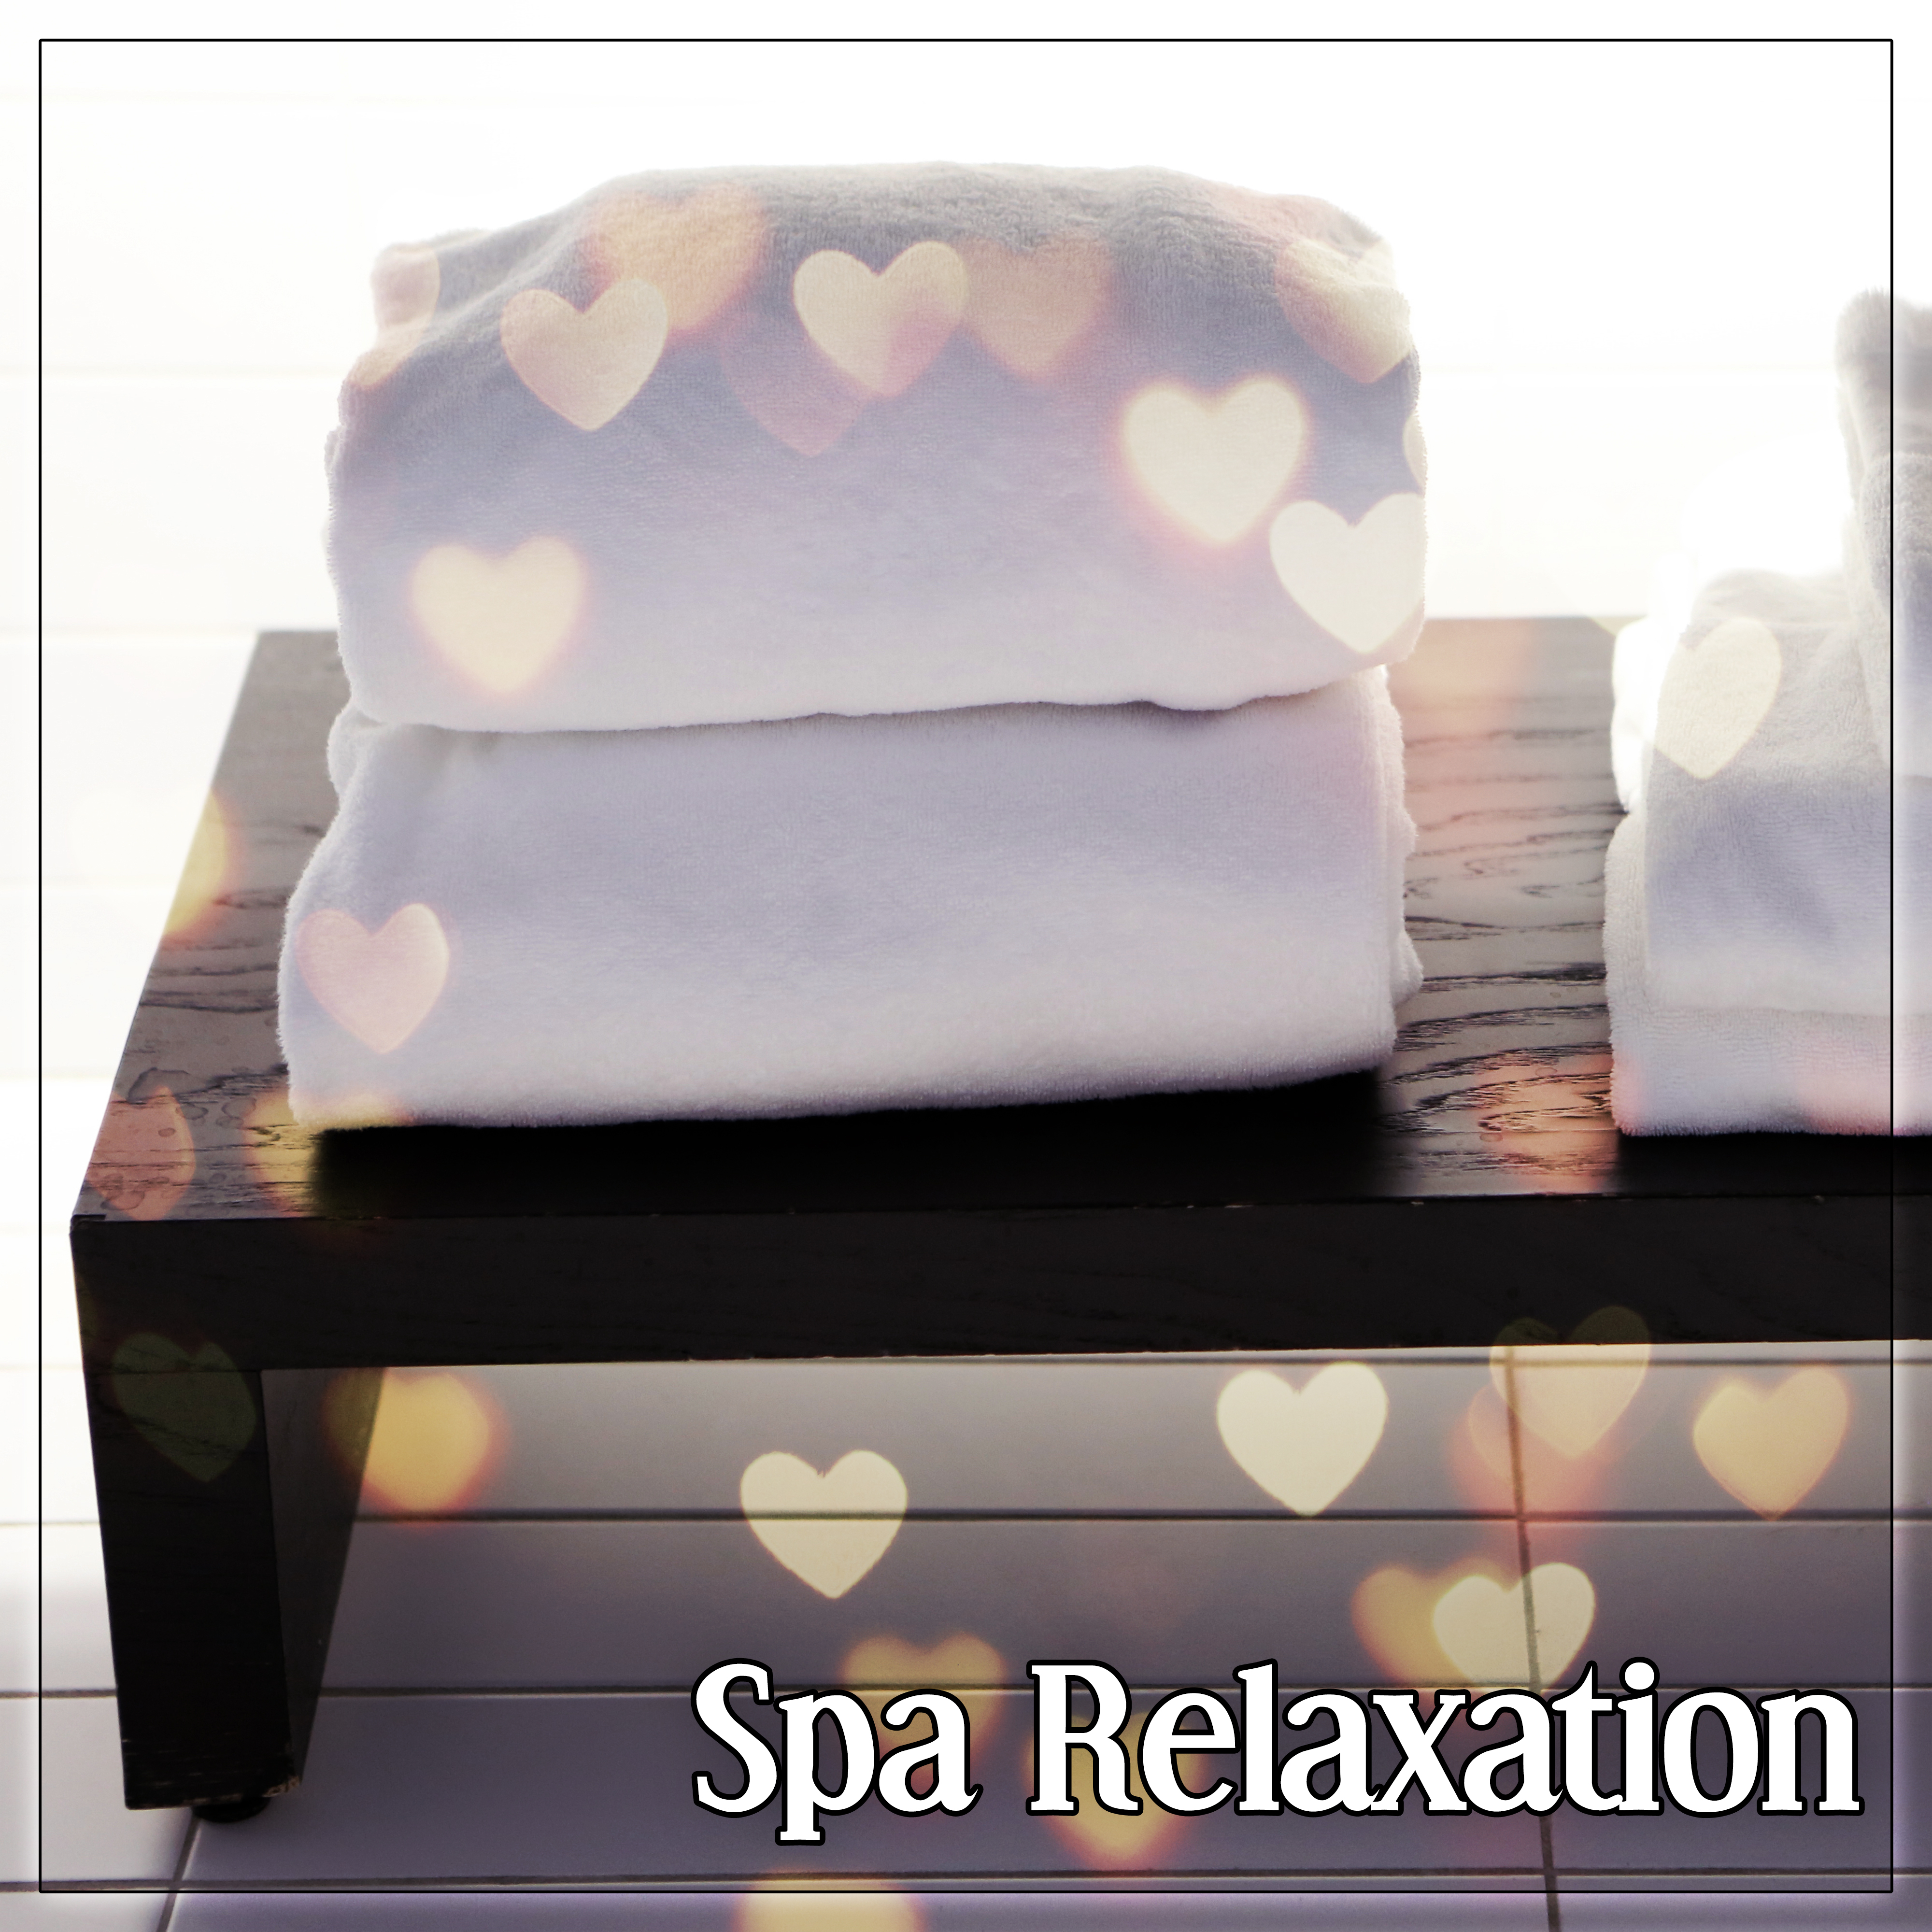 Spa: Relaxation – Organic Spa, Natural Immersion, Resting Sleep, Meadows of Relaxation